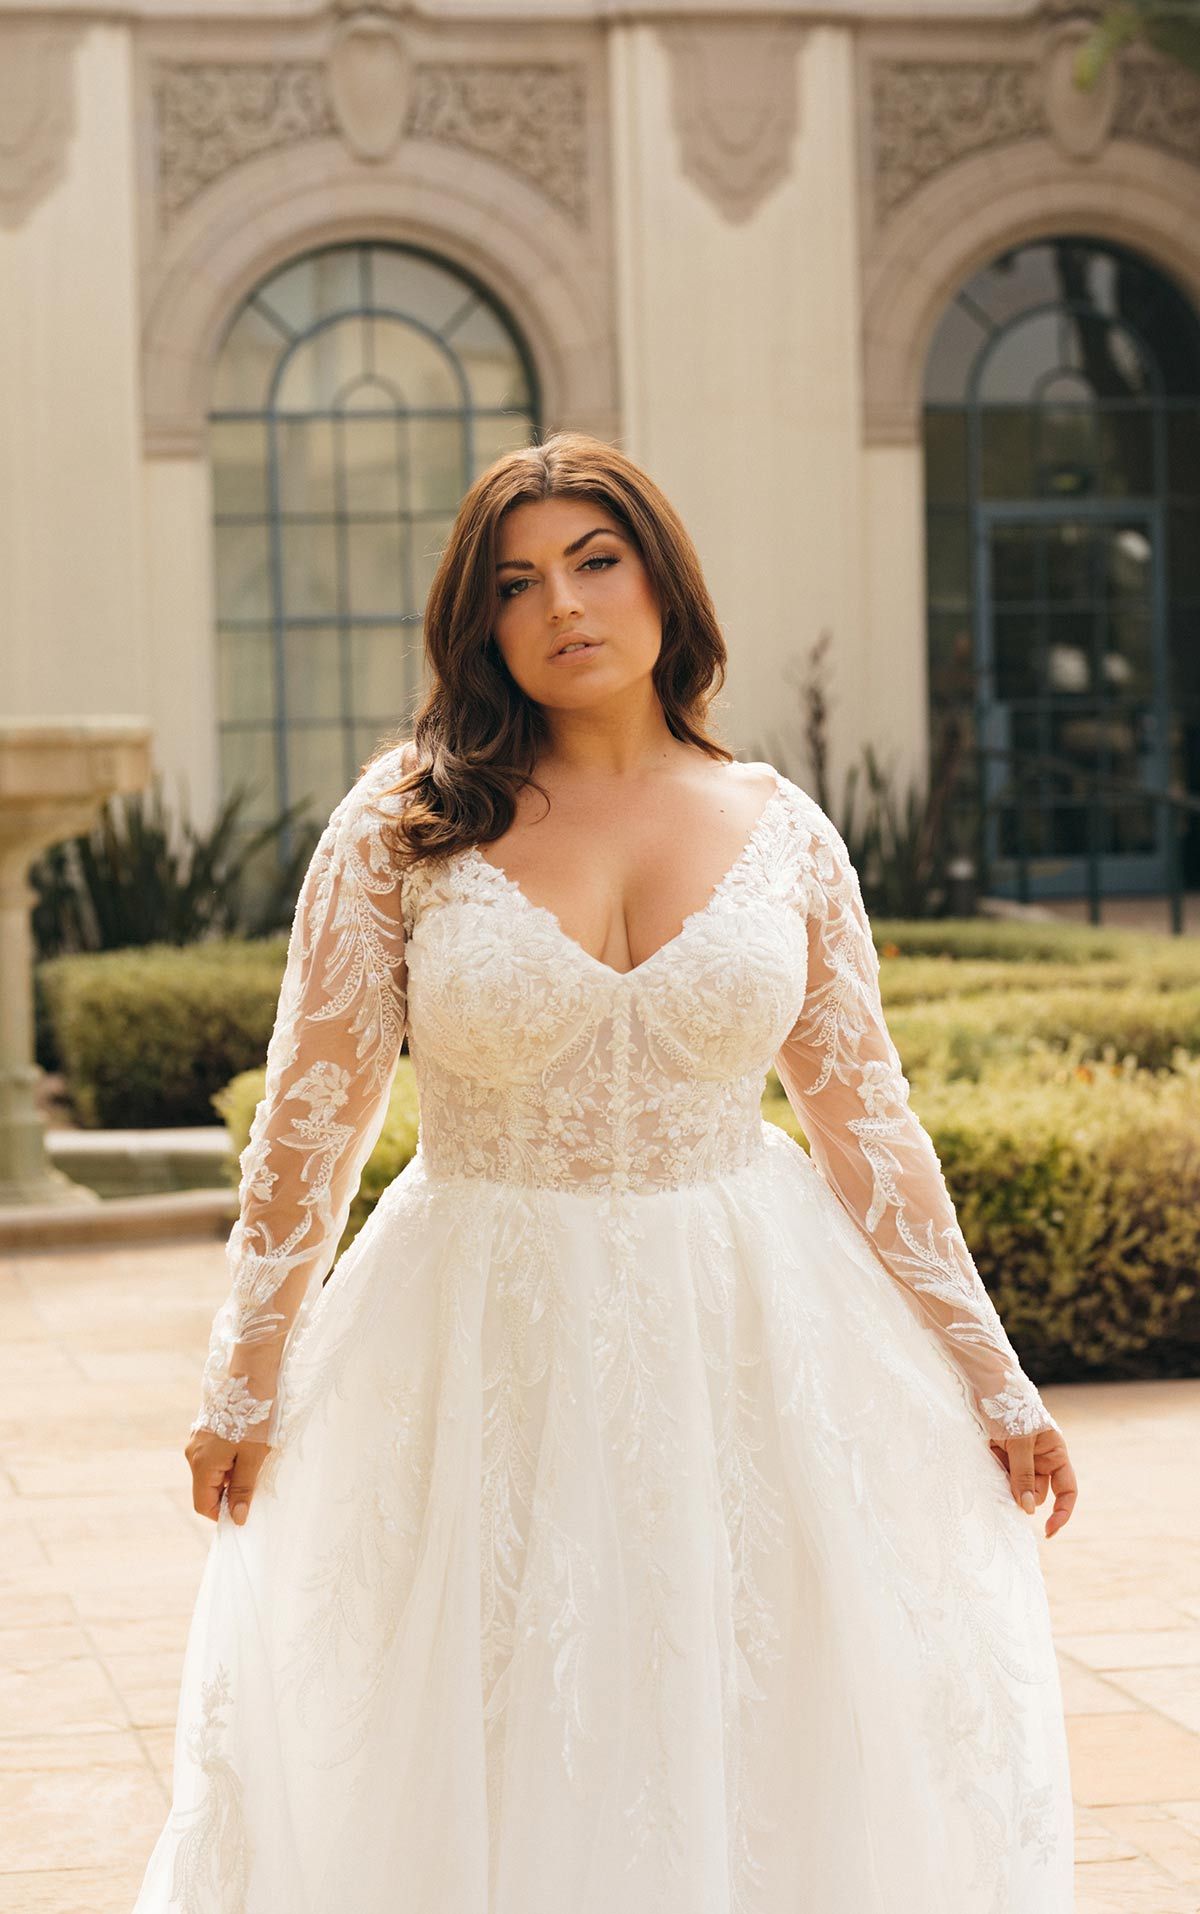 Plus Size Wedding dress: Pick the best
one today